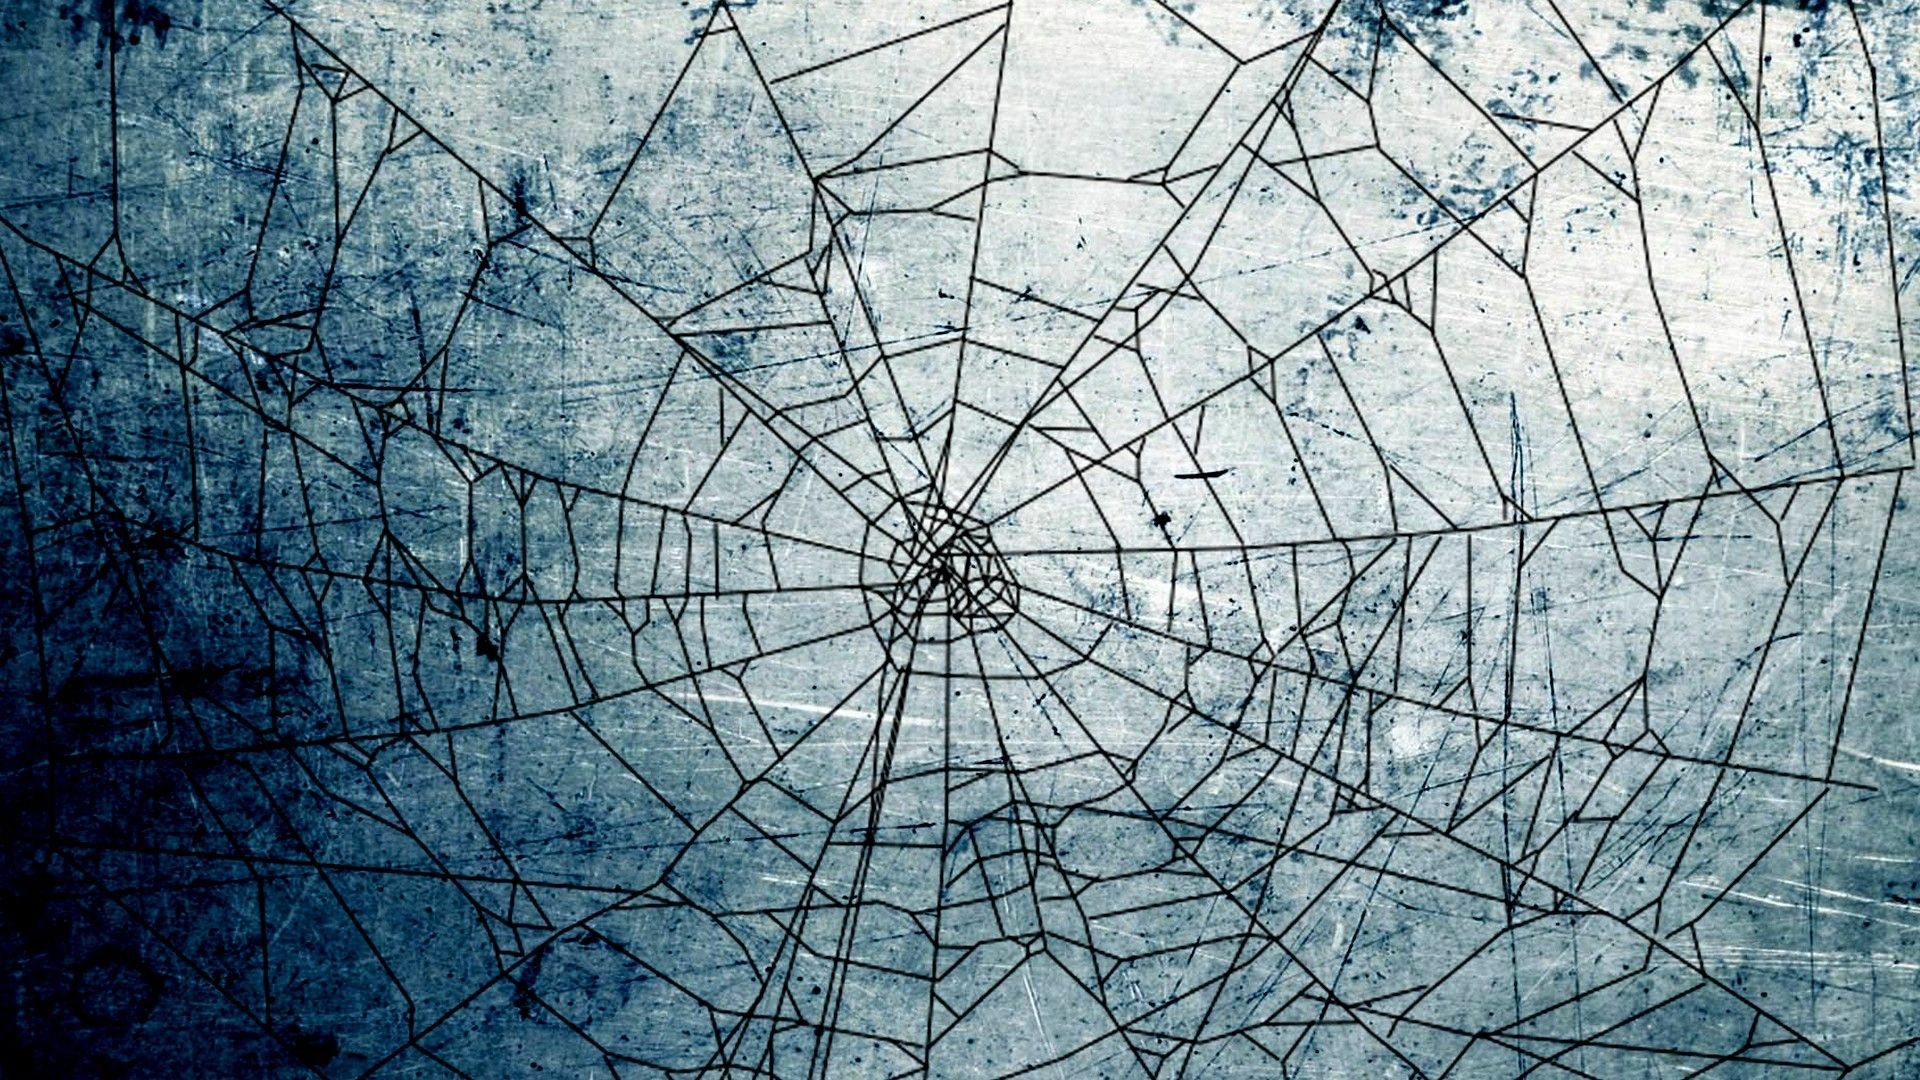 1920x1080 Spider Web Wallpapers 16 Best Free Spider Web Hd Wallpaper For Iphone | Hd wallpaper iphone, Hd wallpaper, Amazing hd wallpapers